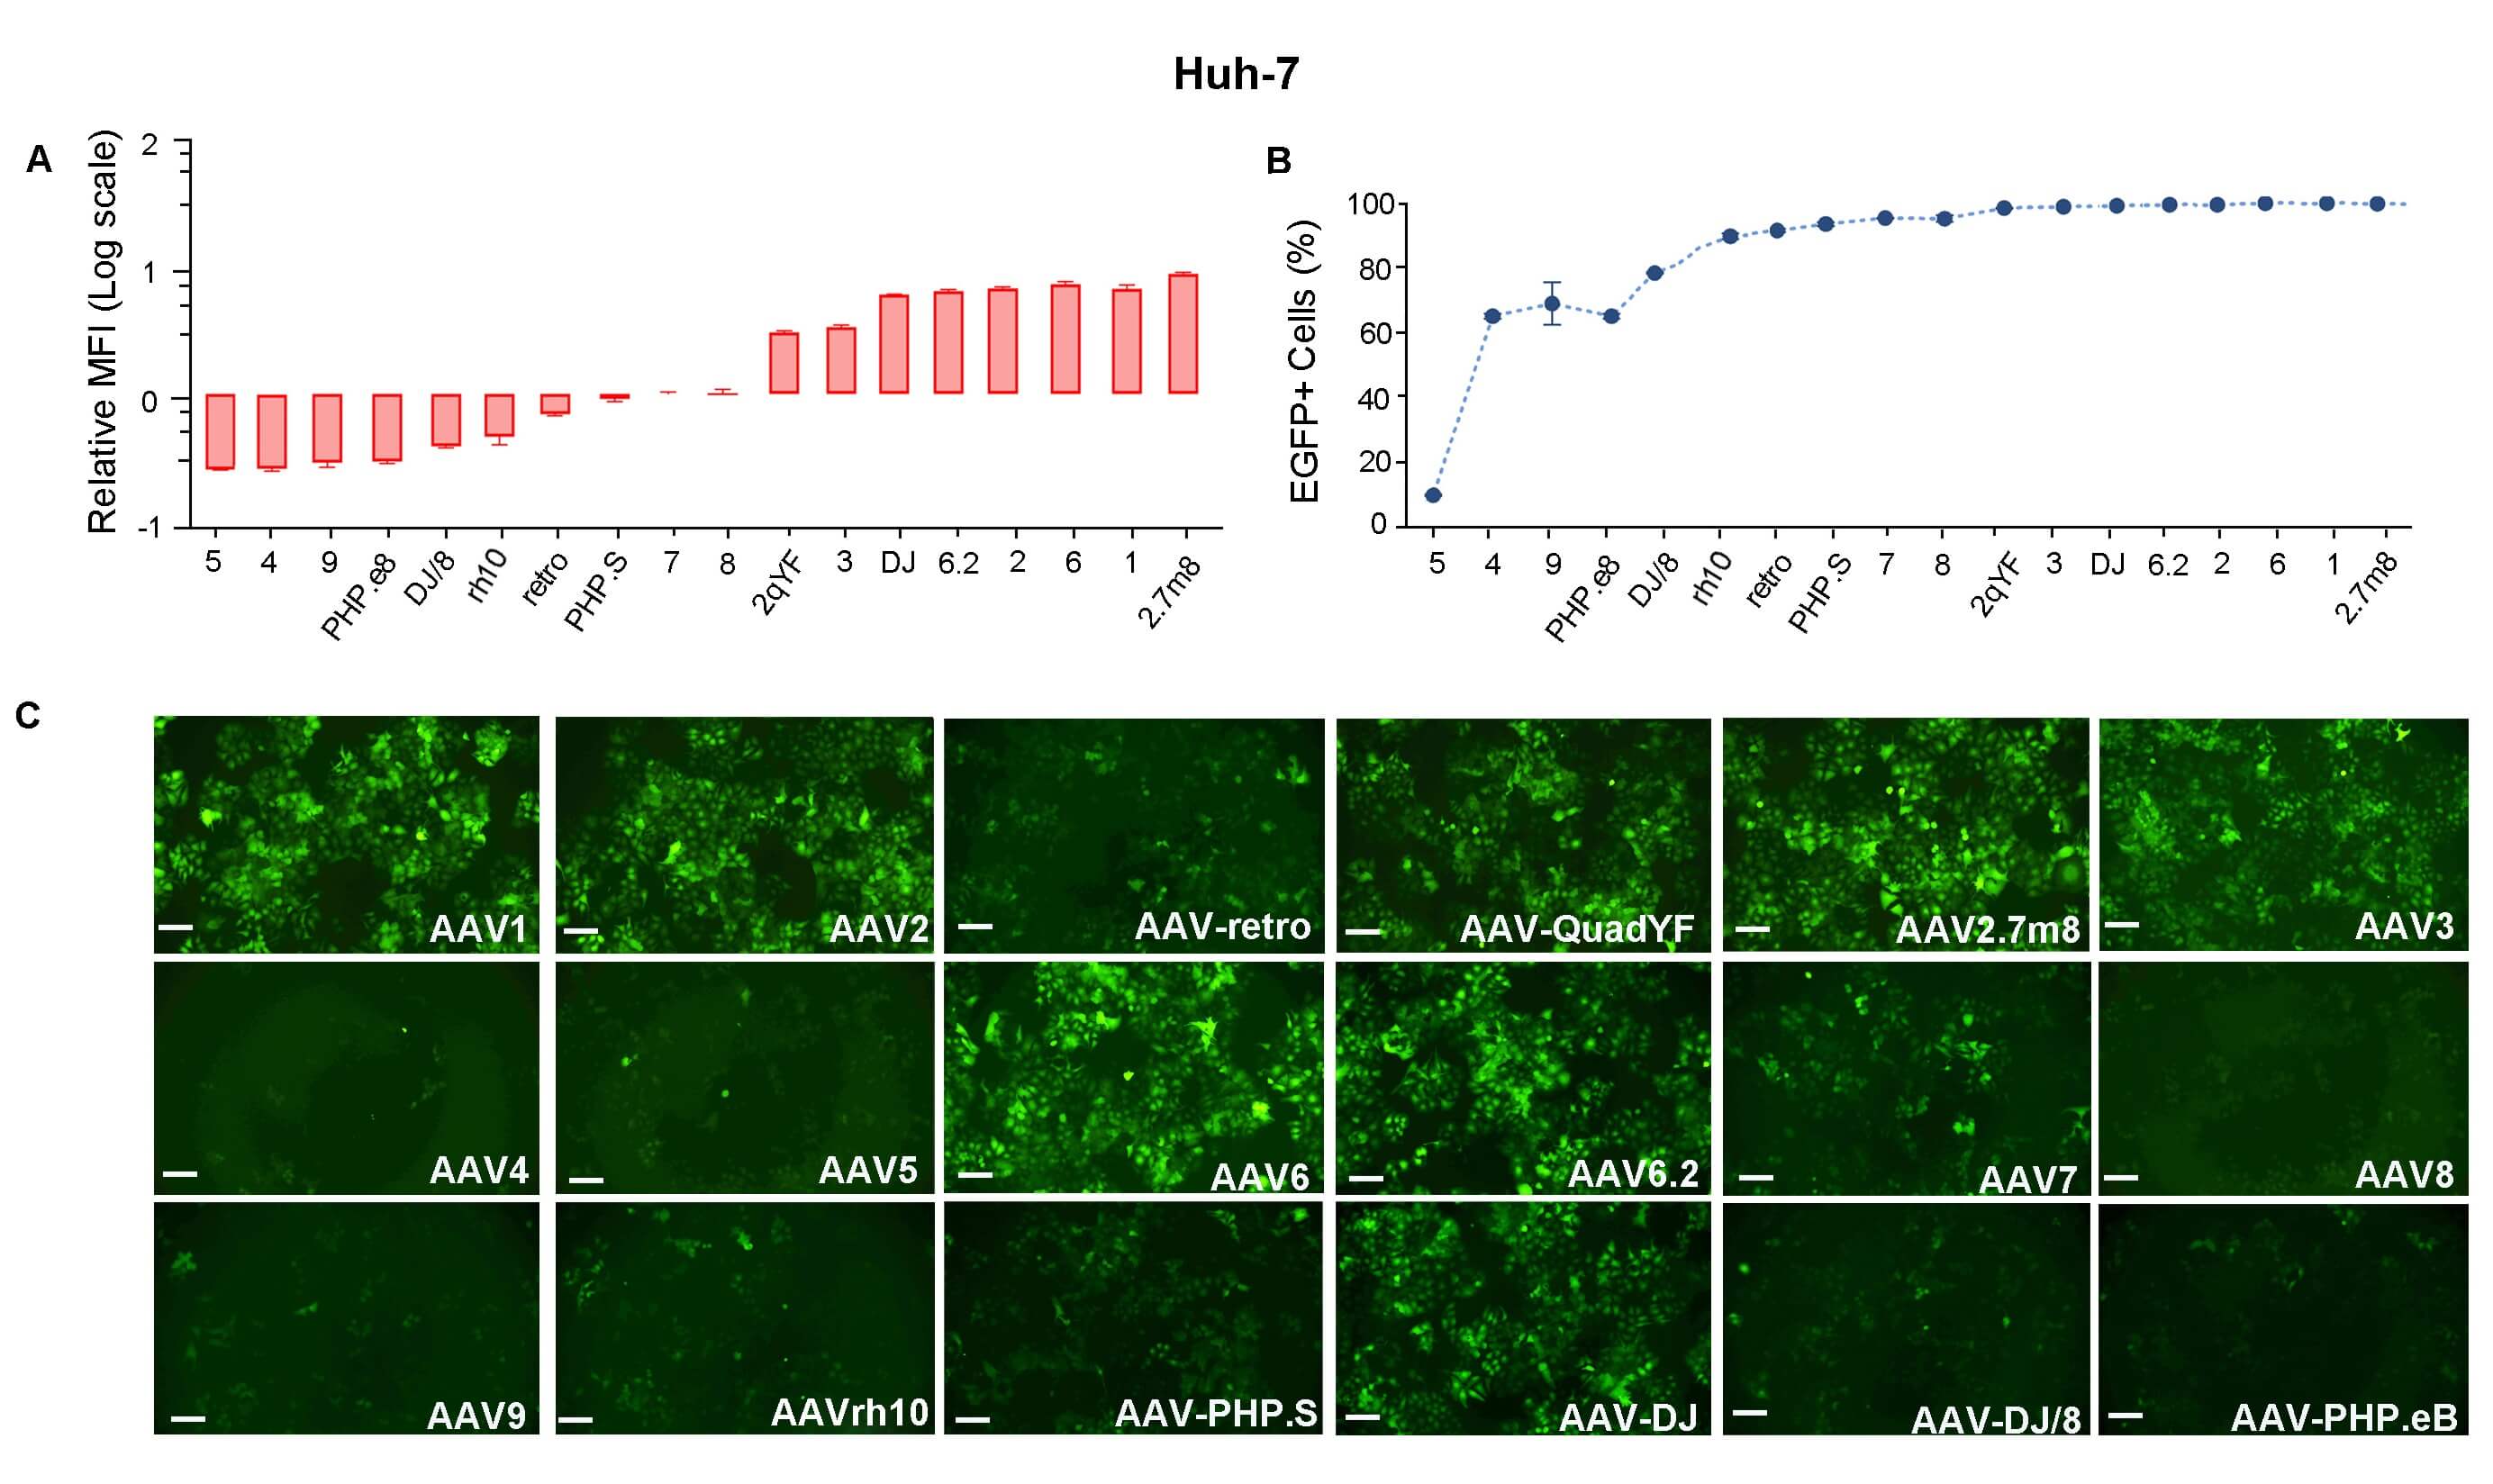 Huh-7 cells were transduced with 18 serotypes of recombinant AAVs and presented strong EGFP fluorescent signals.